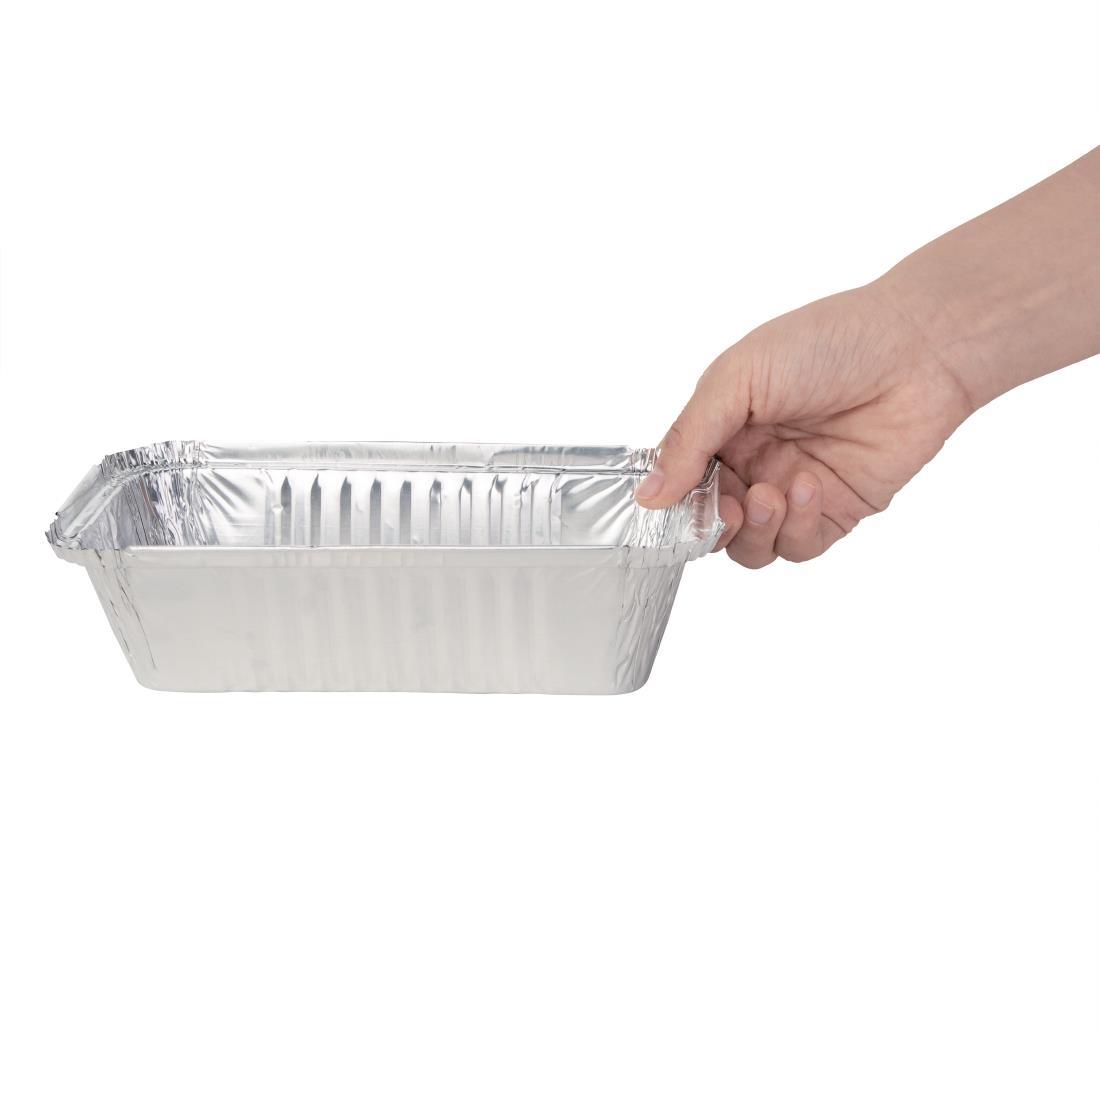 Fiesta Recyclable Foil Containers Large 688ml / 24oz (Pack of 500) - CD951  - 3